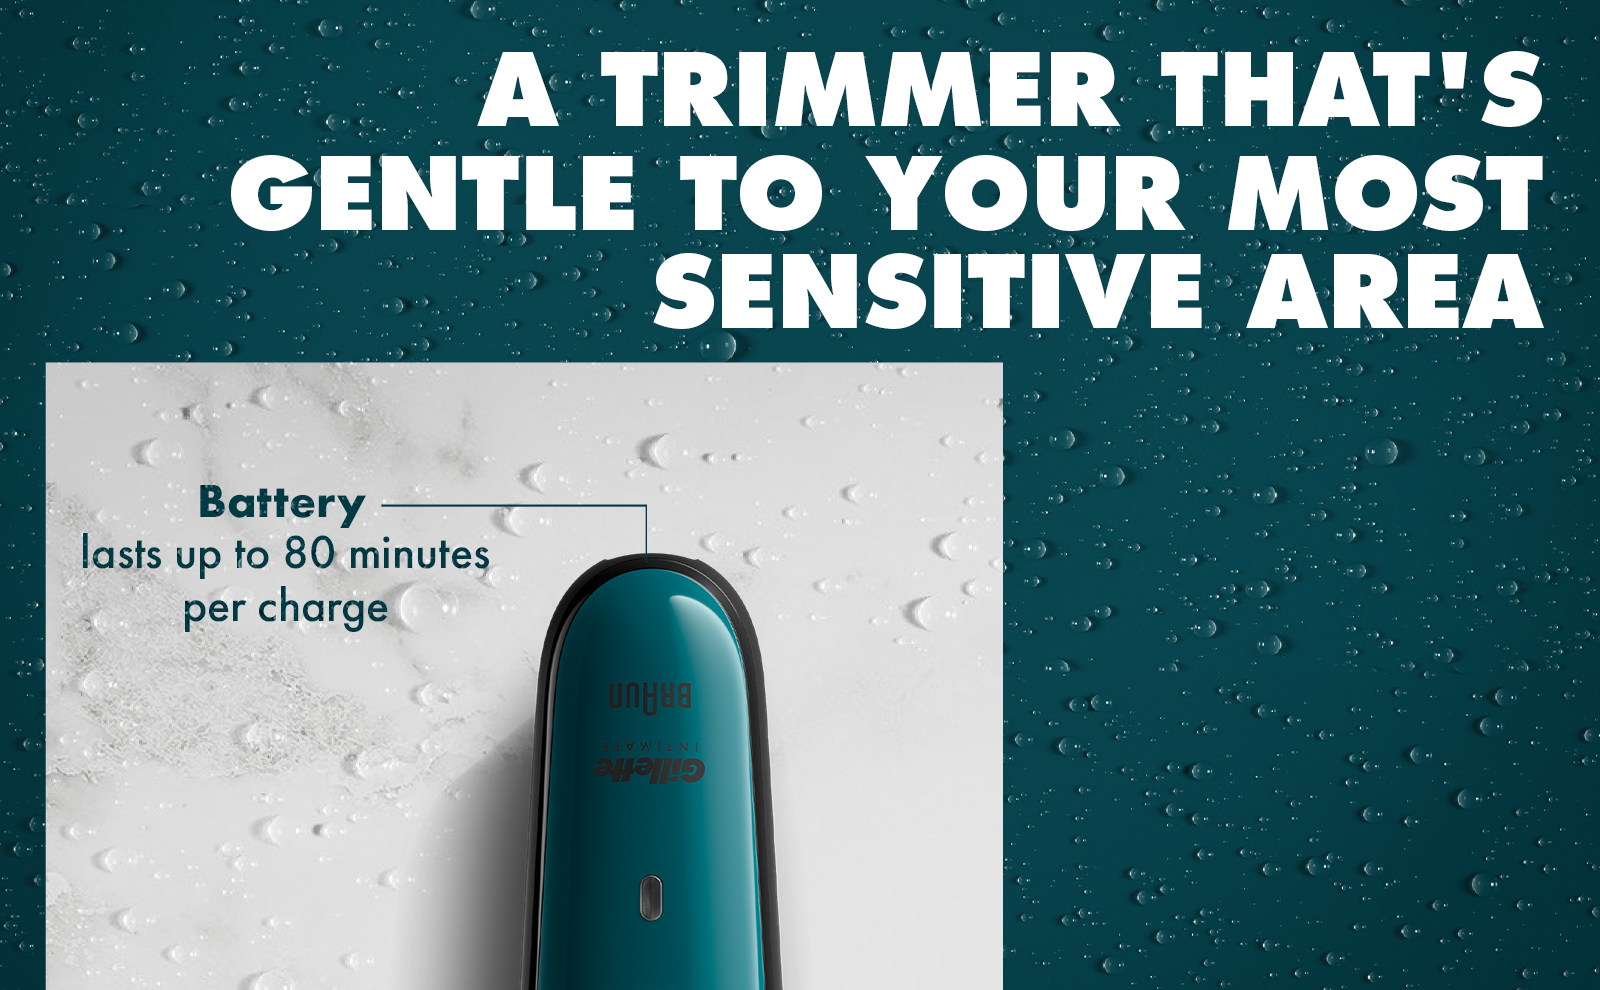 A trimmer that's gentle to your most sensitive area. Battery lasts up to 80 minutes per charge.